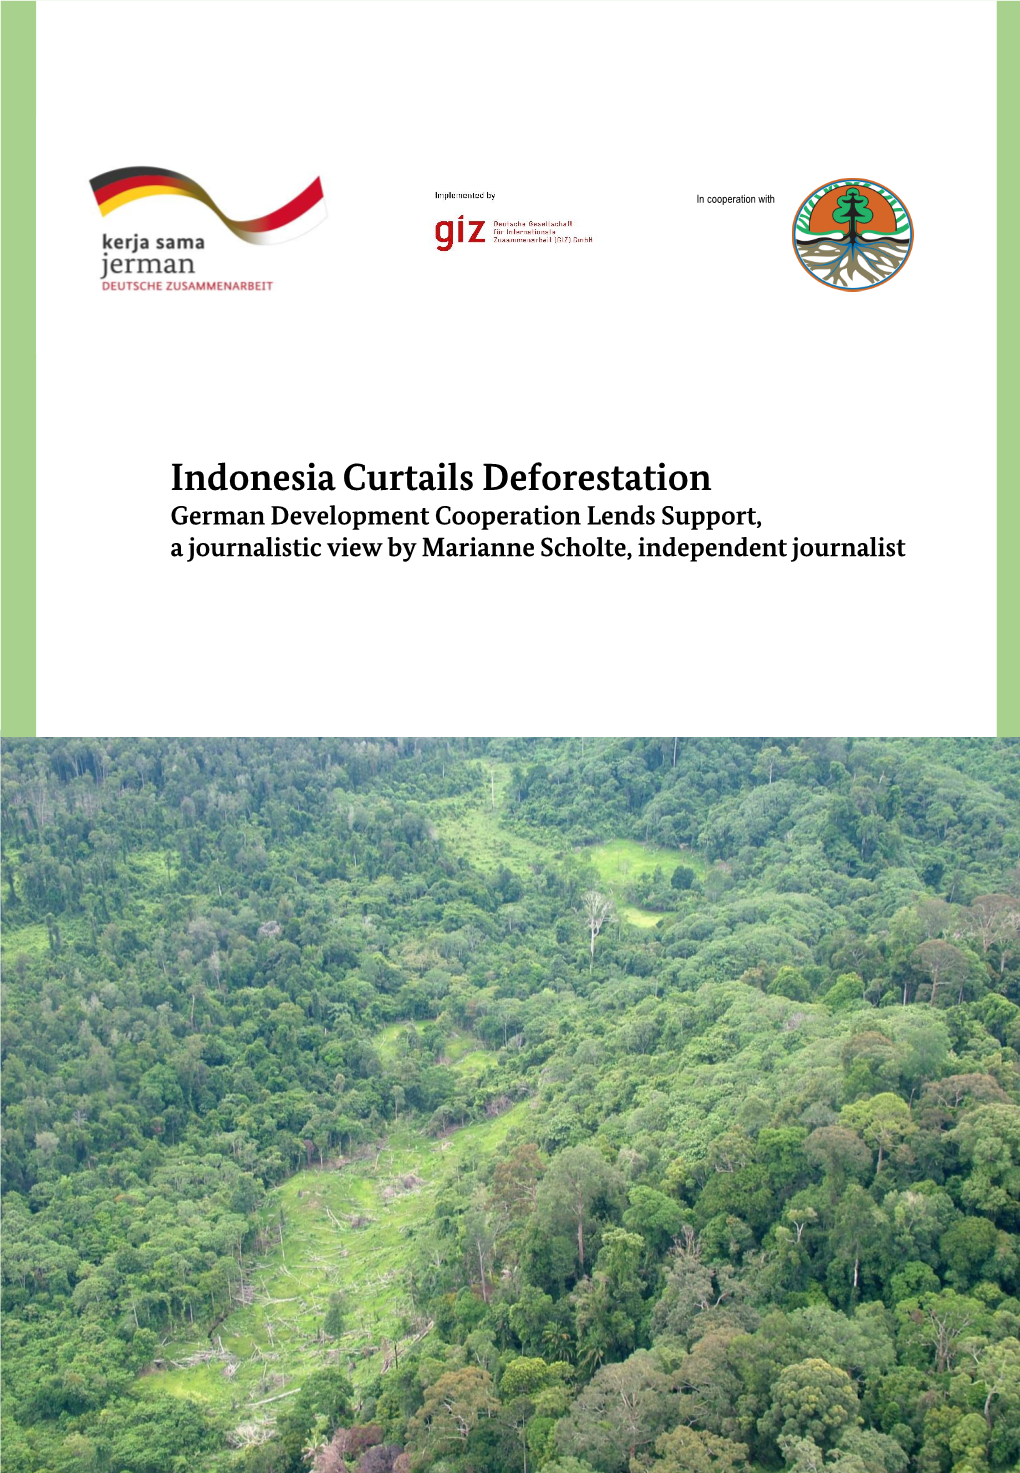 Indonesia Curtails Deforestation German Development Cooperation Lends Support, a Journalistic View by Marianne Scholte, Independent Journalist